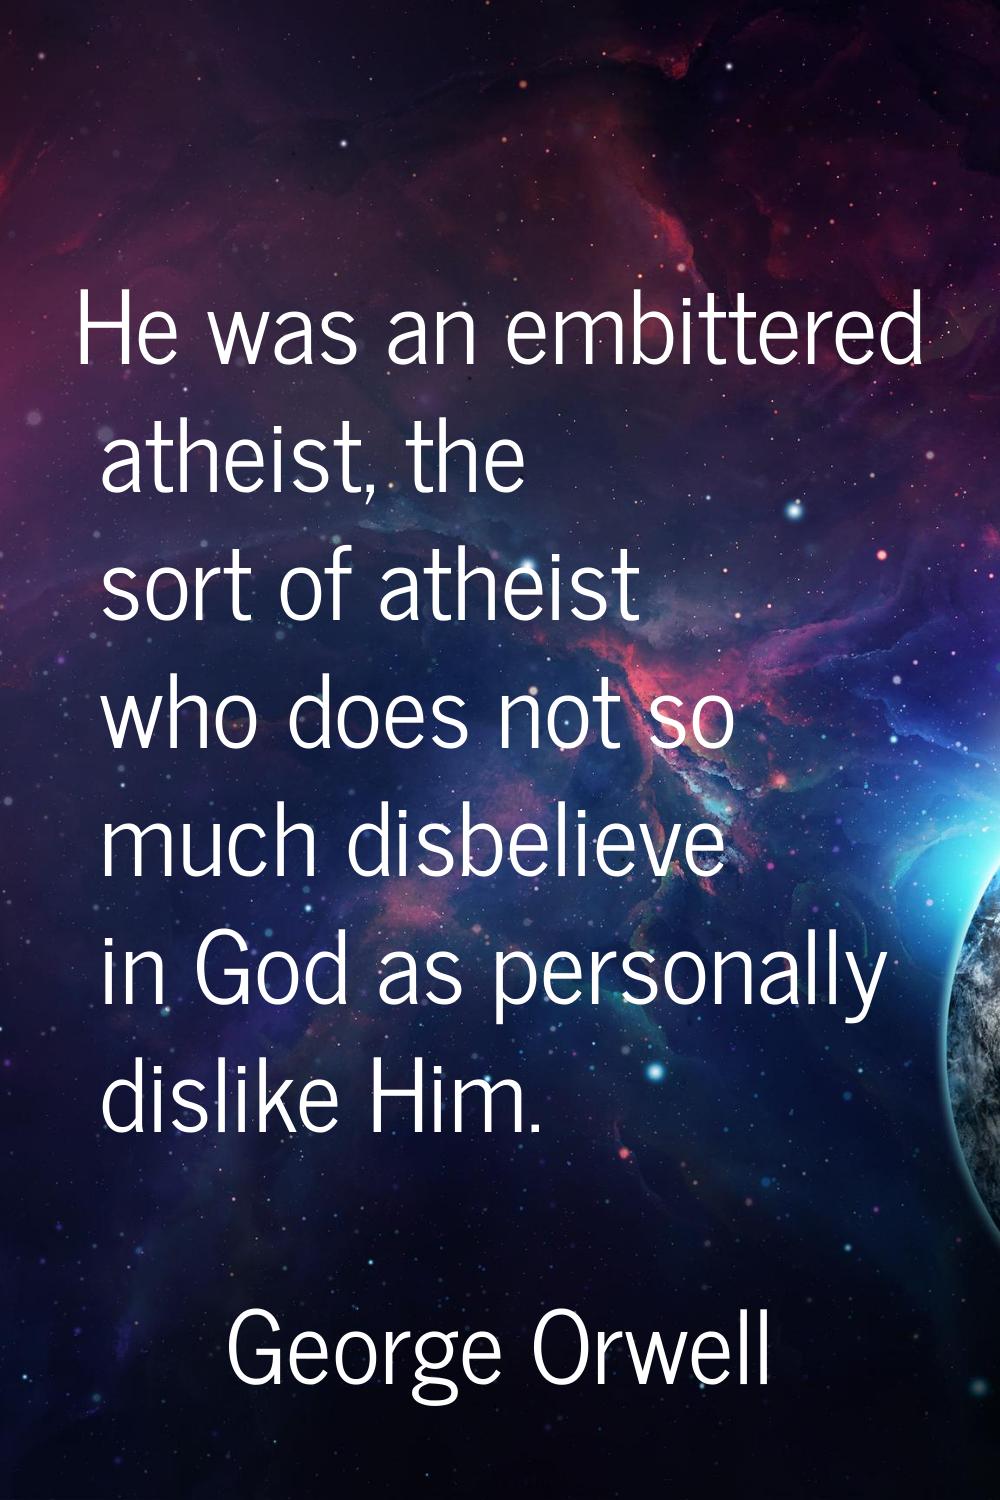 He was an embittered atheist, the sort of atheist who does not so much disbelieve in God as persona